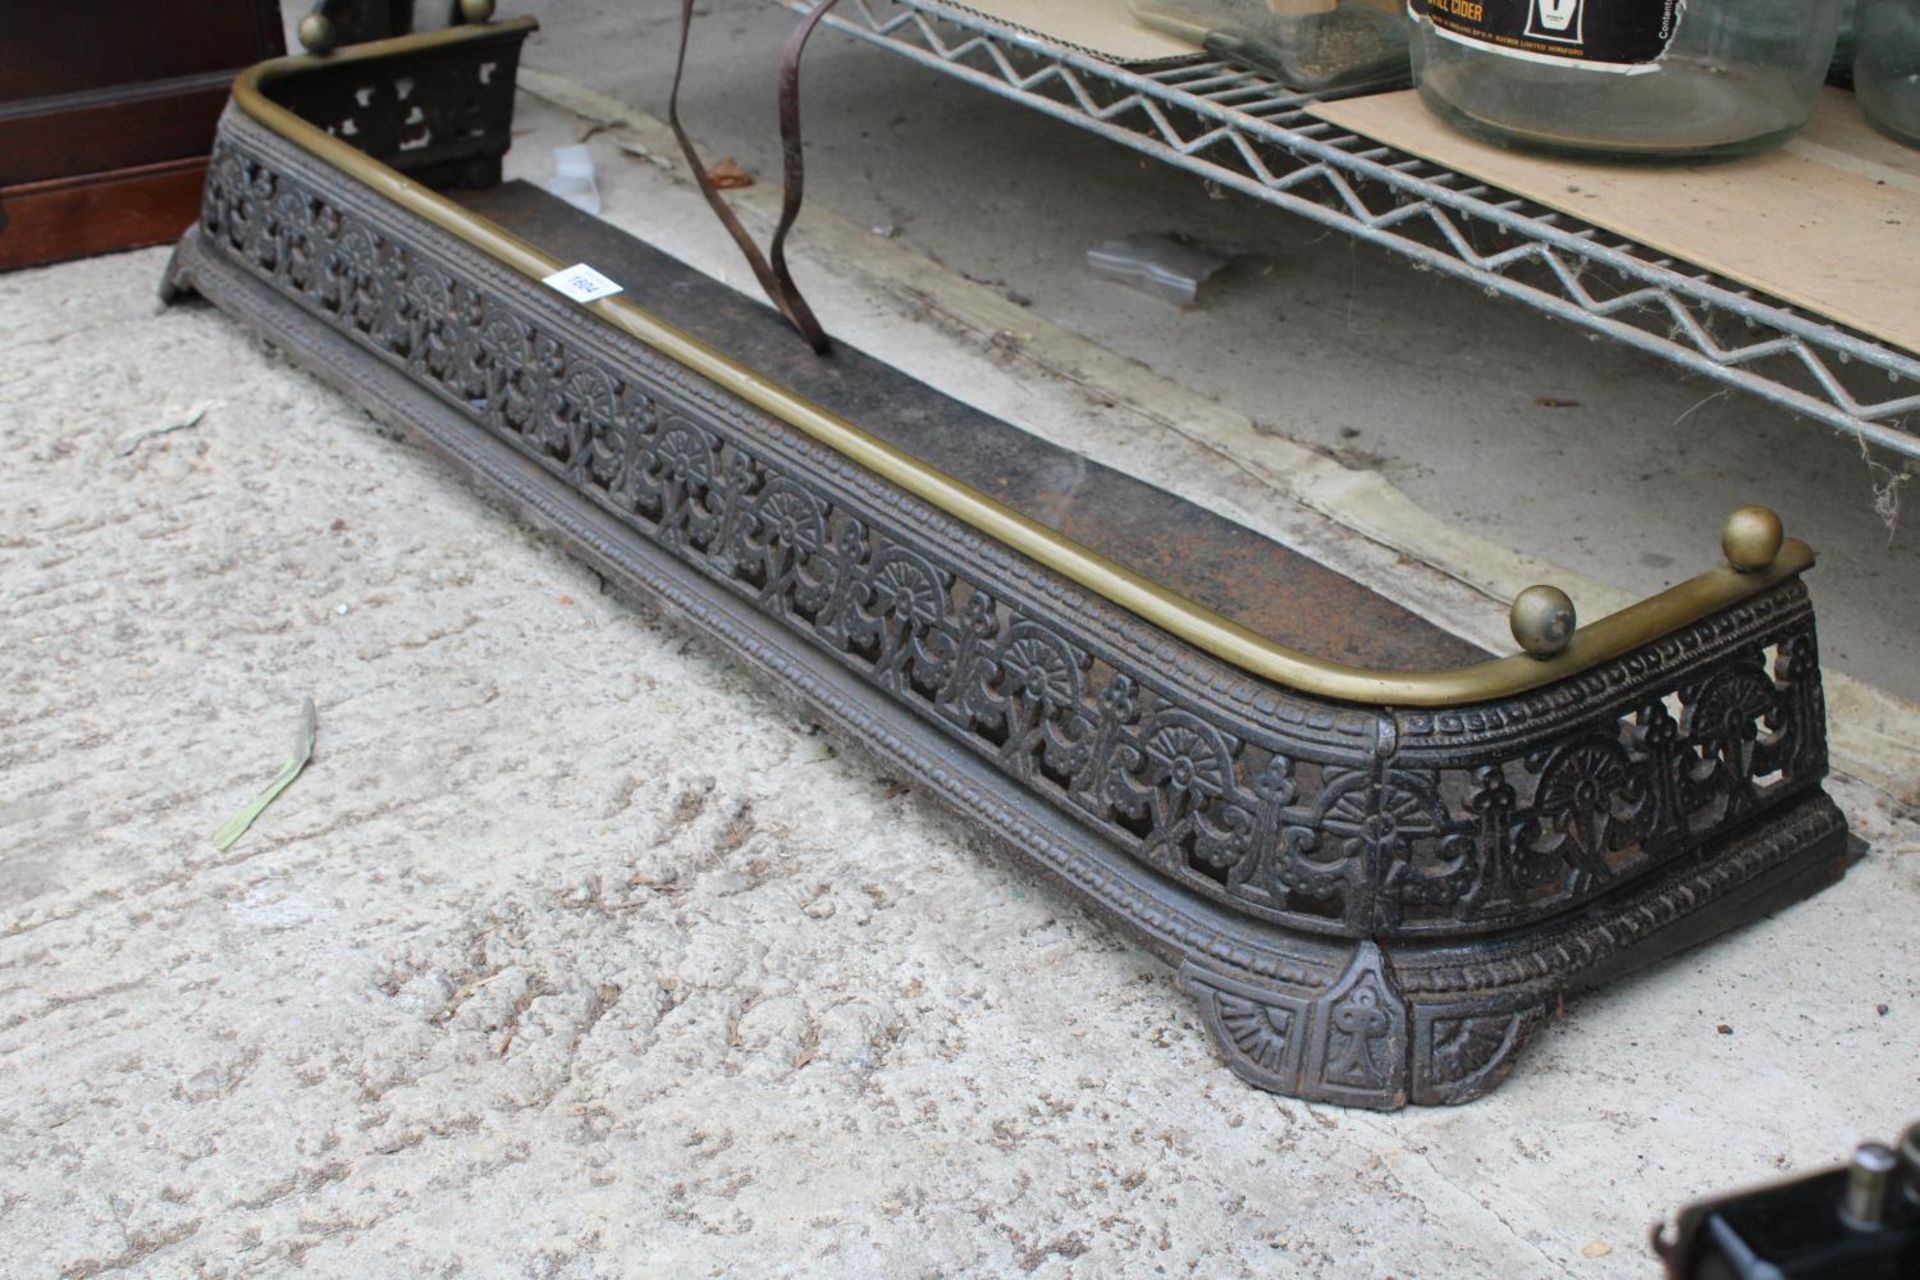 A VINATGE AND HEAVILY ORNATE CAST IRON FIRE FENDER WITH BRASS TRIM - Image 2 of 2